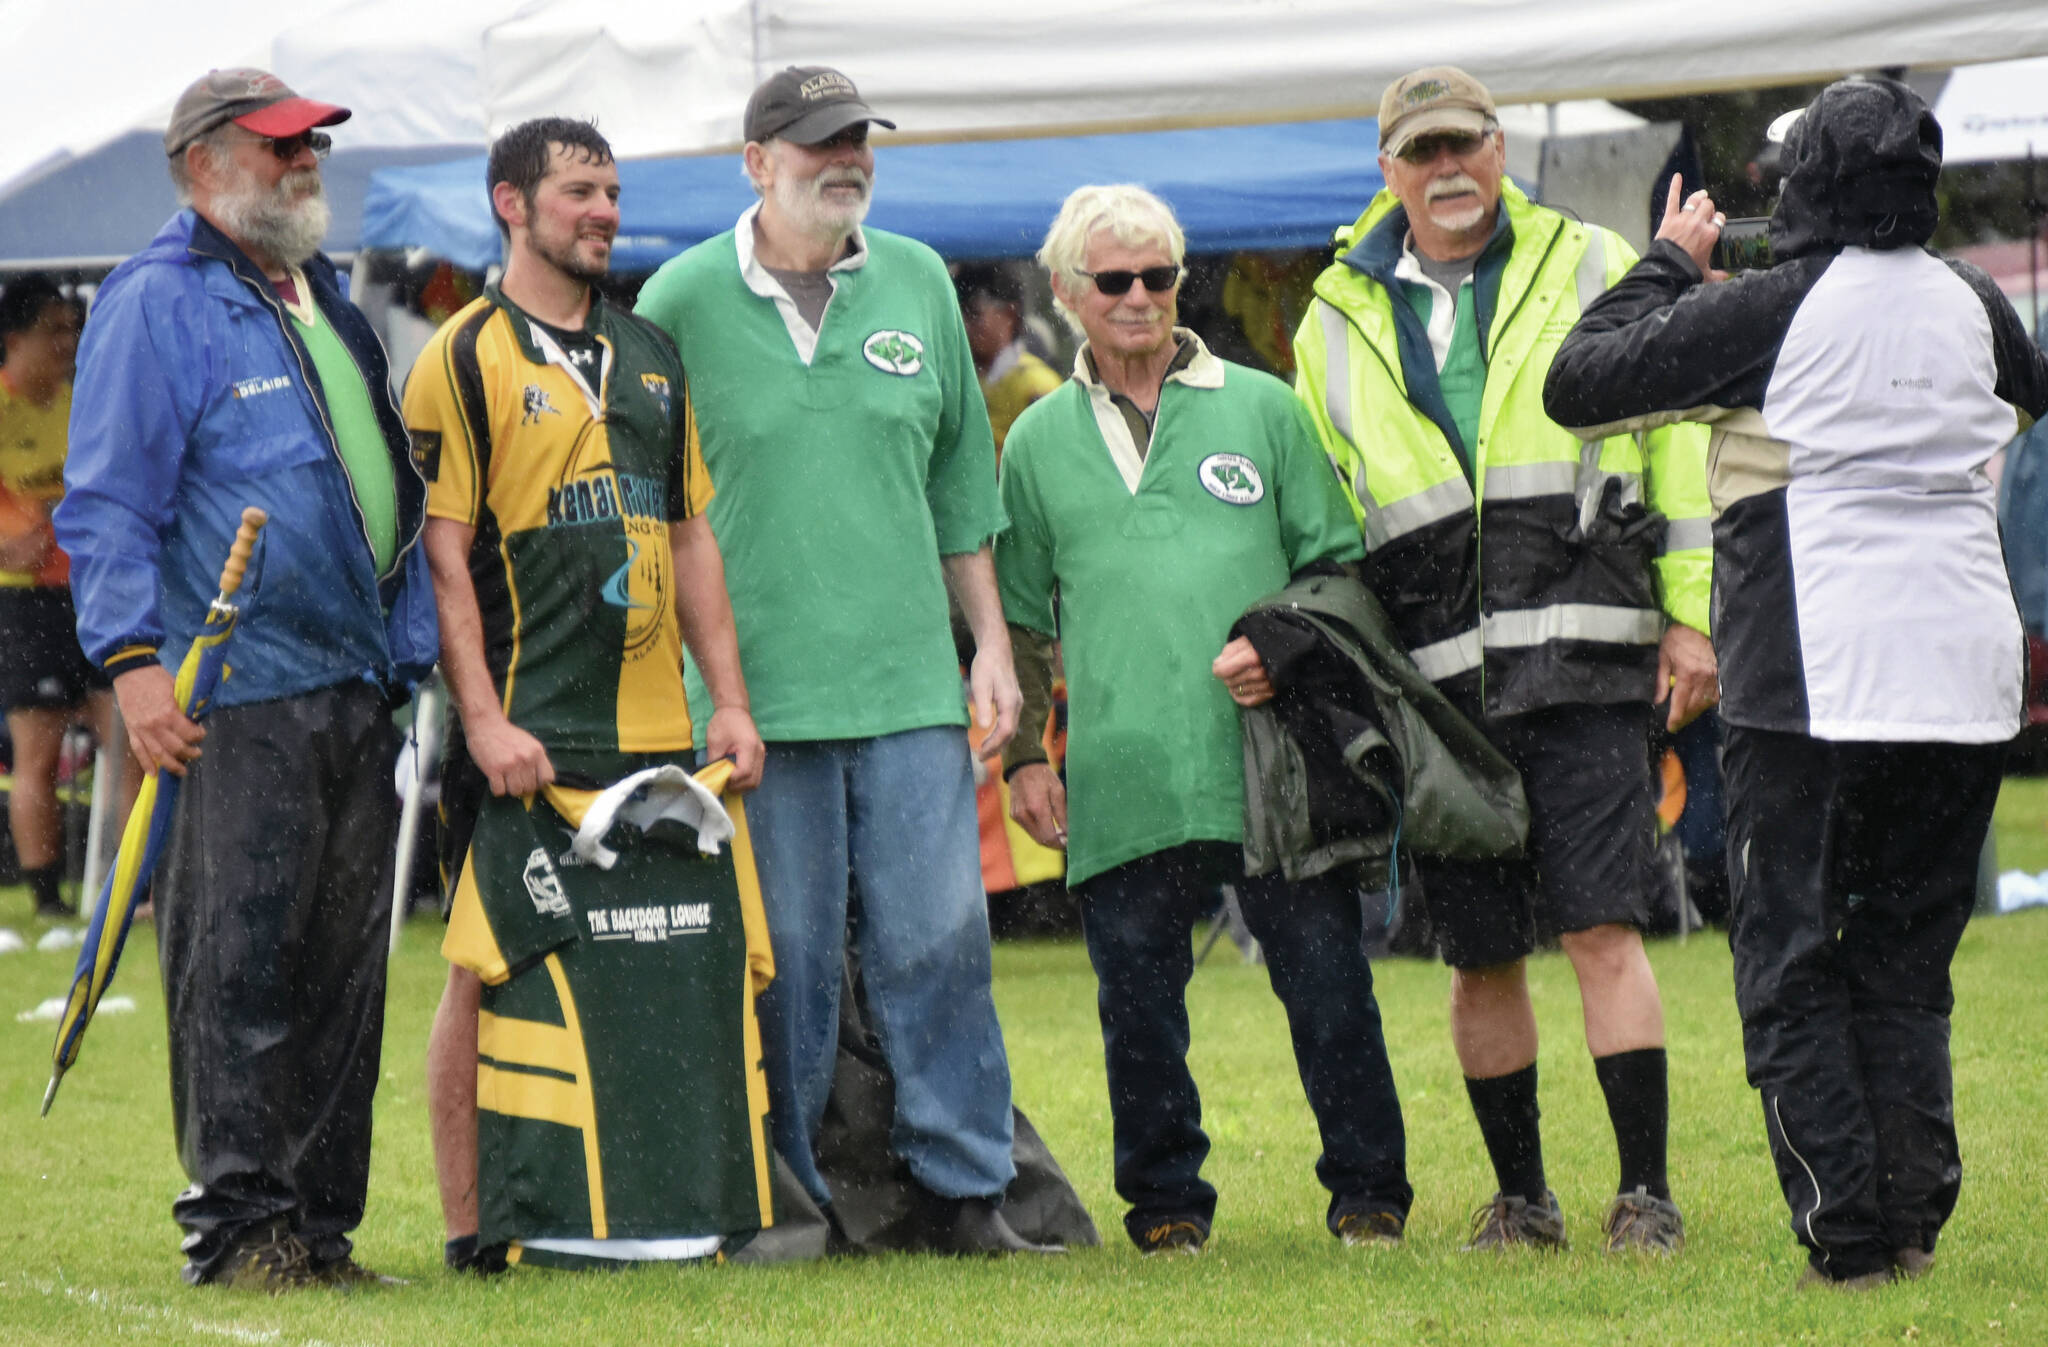 John Fitzpatrick, Dan Balmer, Chip Duggan, Tom Klinker and Wayne Aderhold pose at the Between the Tides Rugby Tourney at Millennium Square Field on Saturday. Fitzpatrick, Duggan, Klinker and Aderhold used to play for the Homer Irish Lords. Balmer is the president and coach for the Kenai Wolfpack.